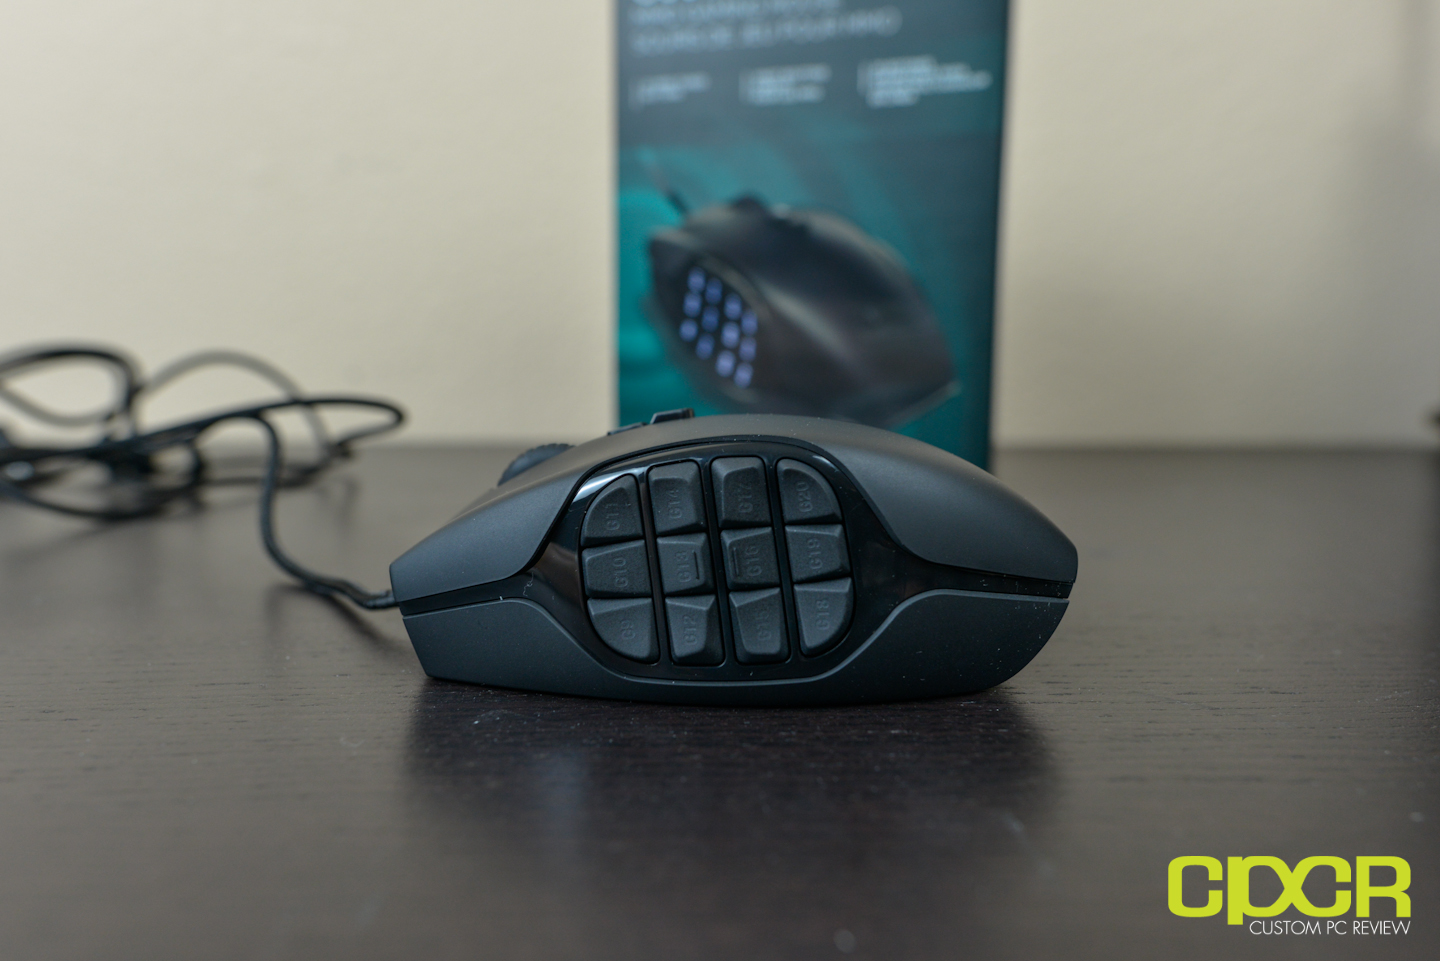 Logitech G600 MMO Gaming Mouse Review